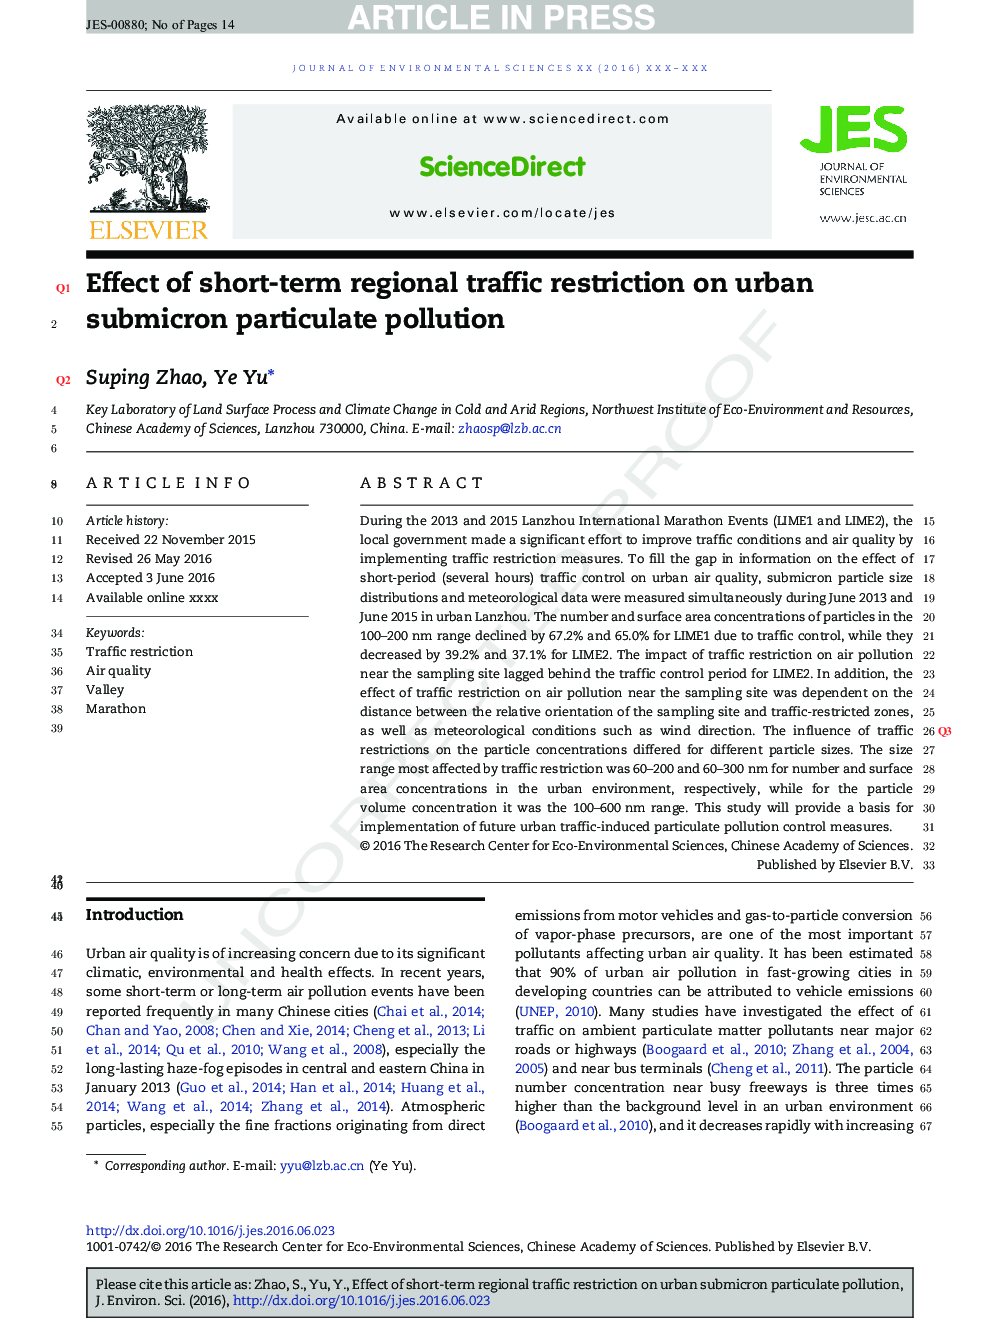 Effect of short-term regional traffic restriction on urban submicron particulate pollution